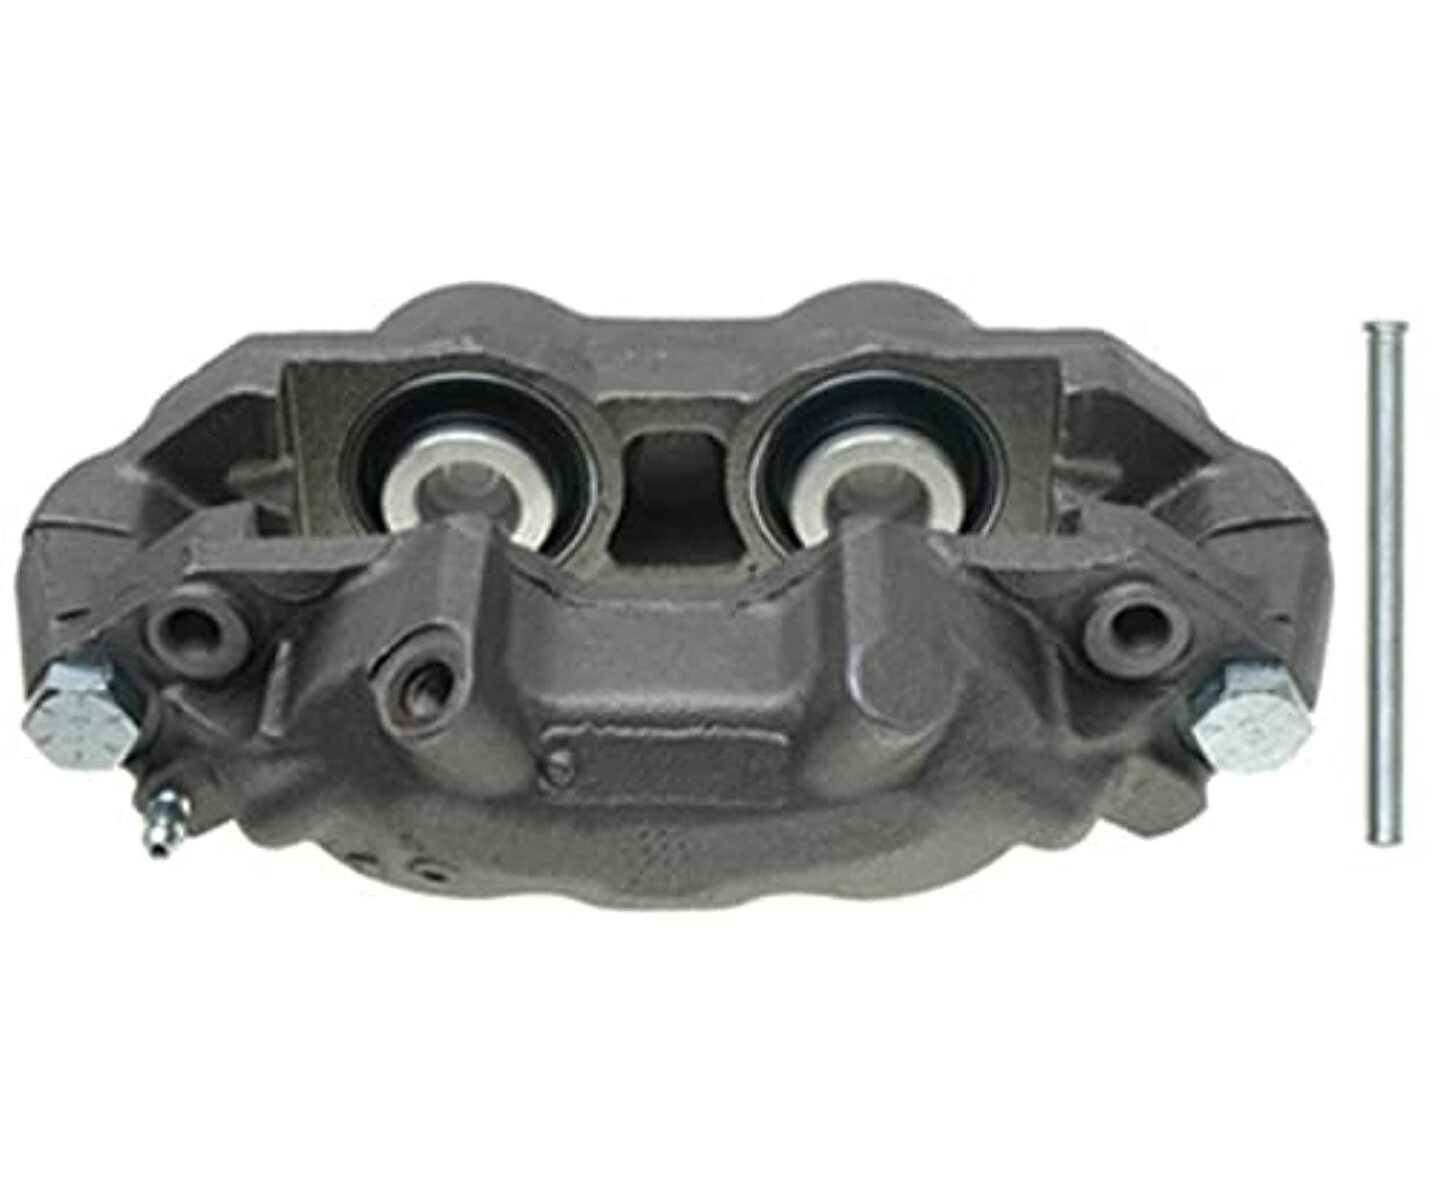 Raybestos RC8001 Professional Grade Remanufactured Loaded Disc Brake Caliper Fits select: 1966-1982 CHEVROLET CORVETTE - image 3 of 6